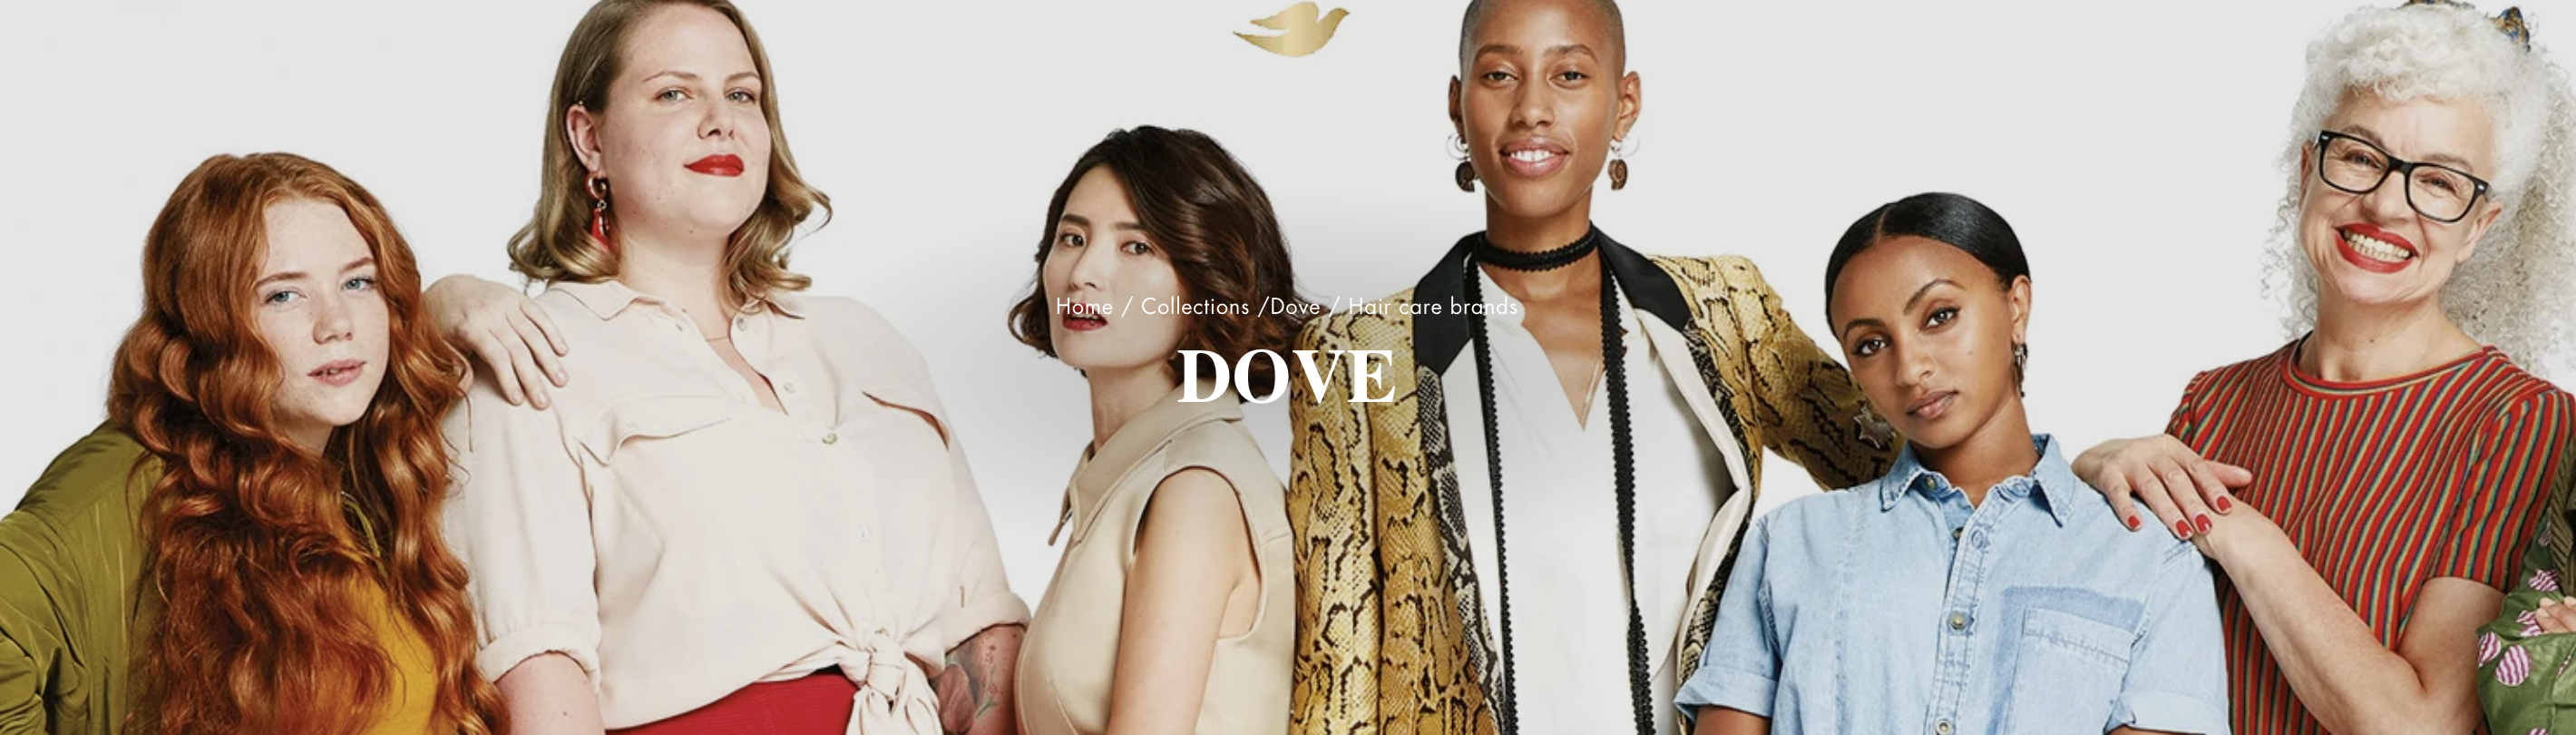 dove small business branding target audience